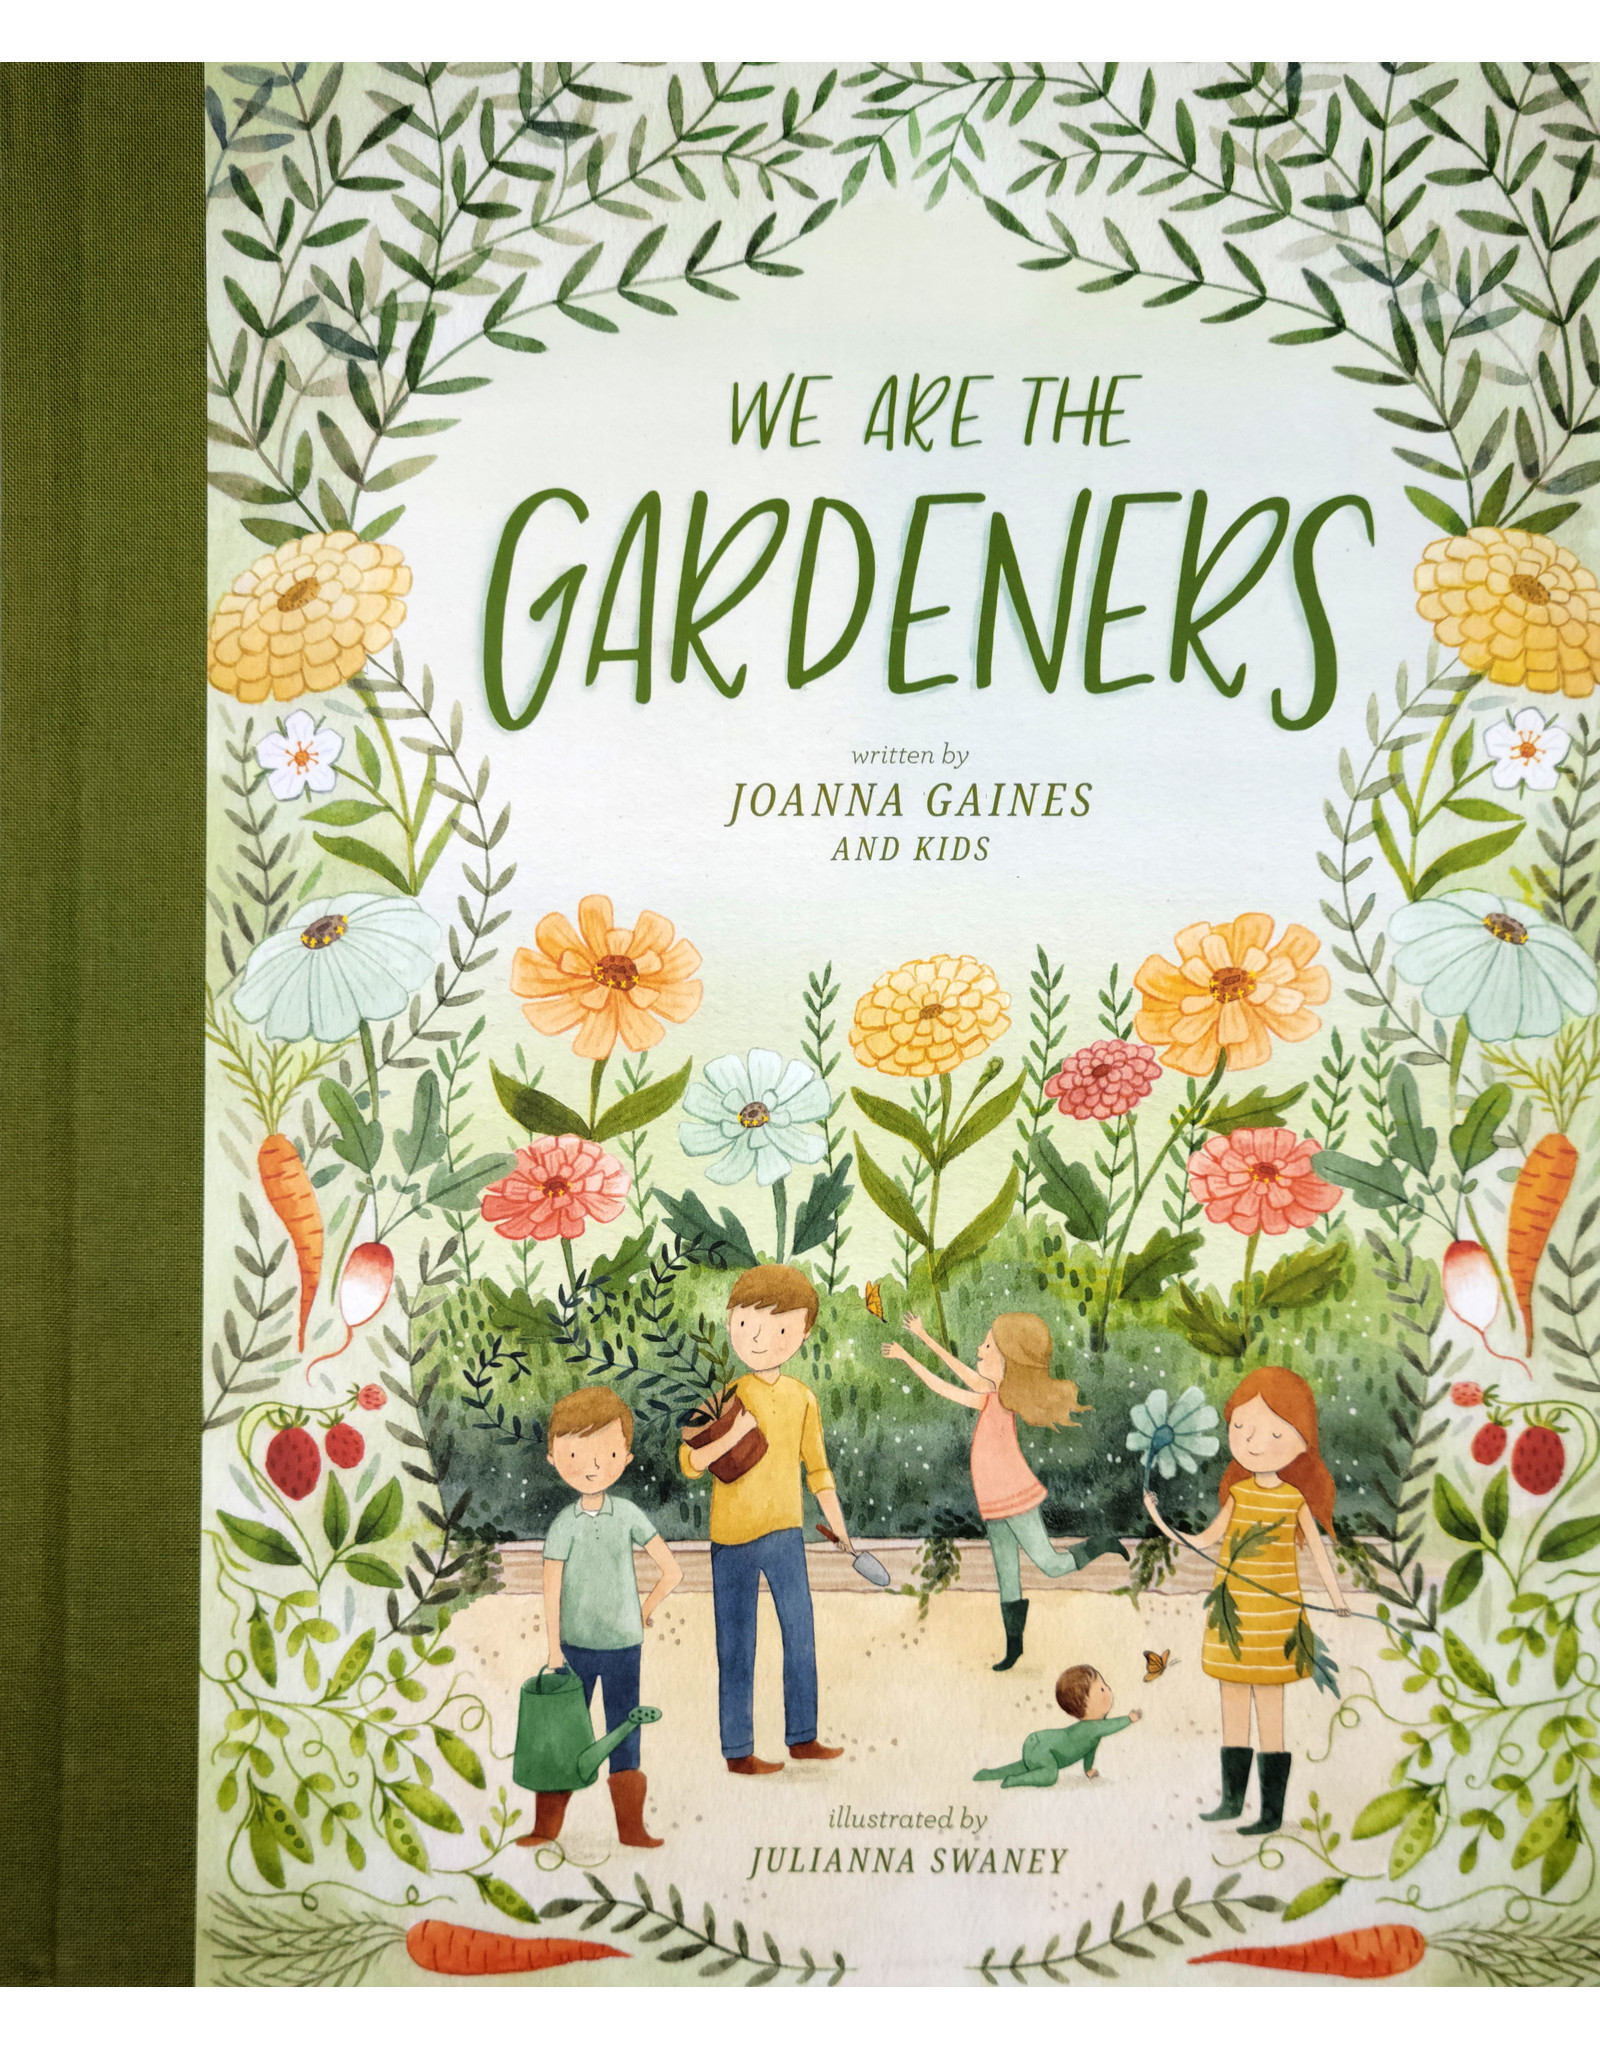 We are the Gardeners